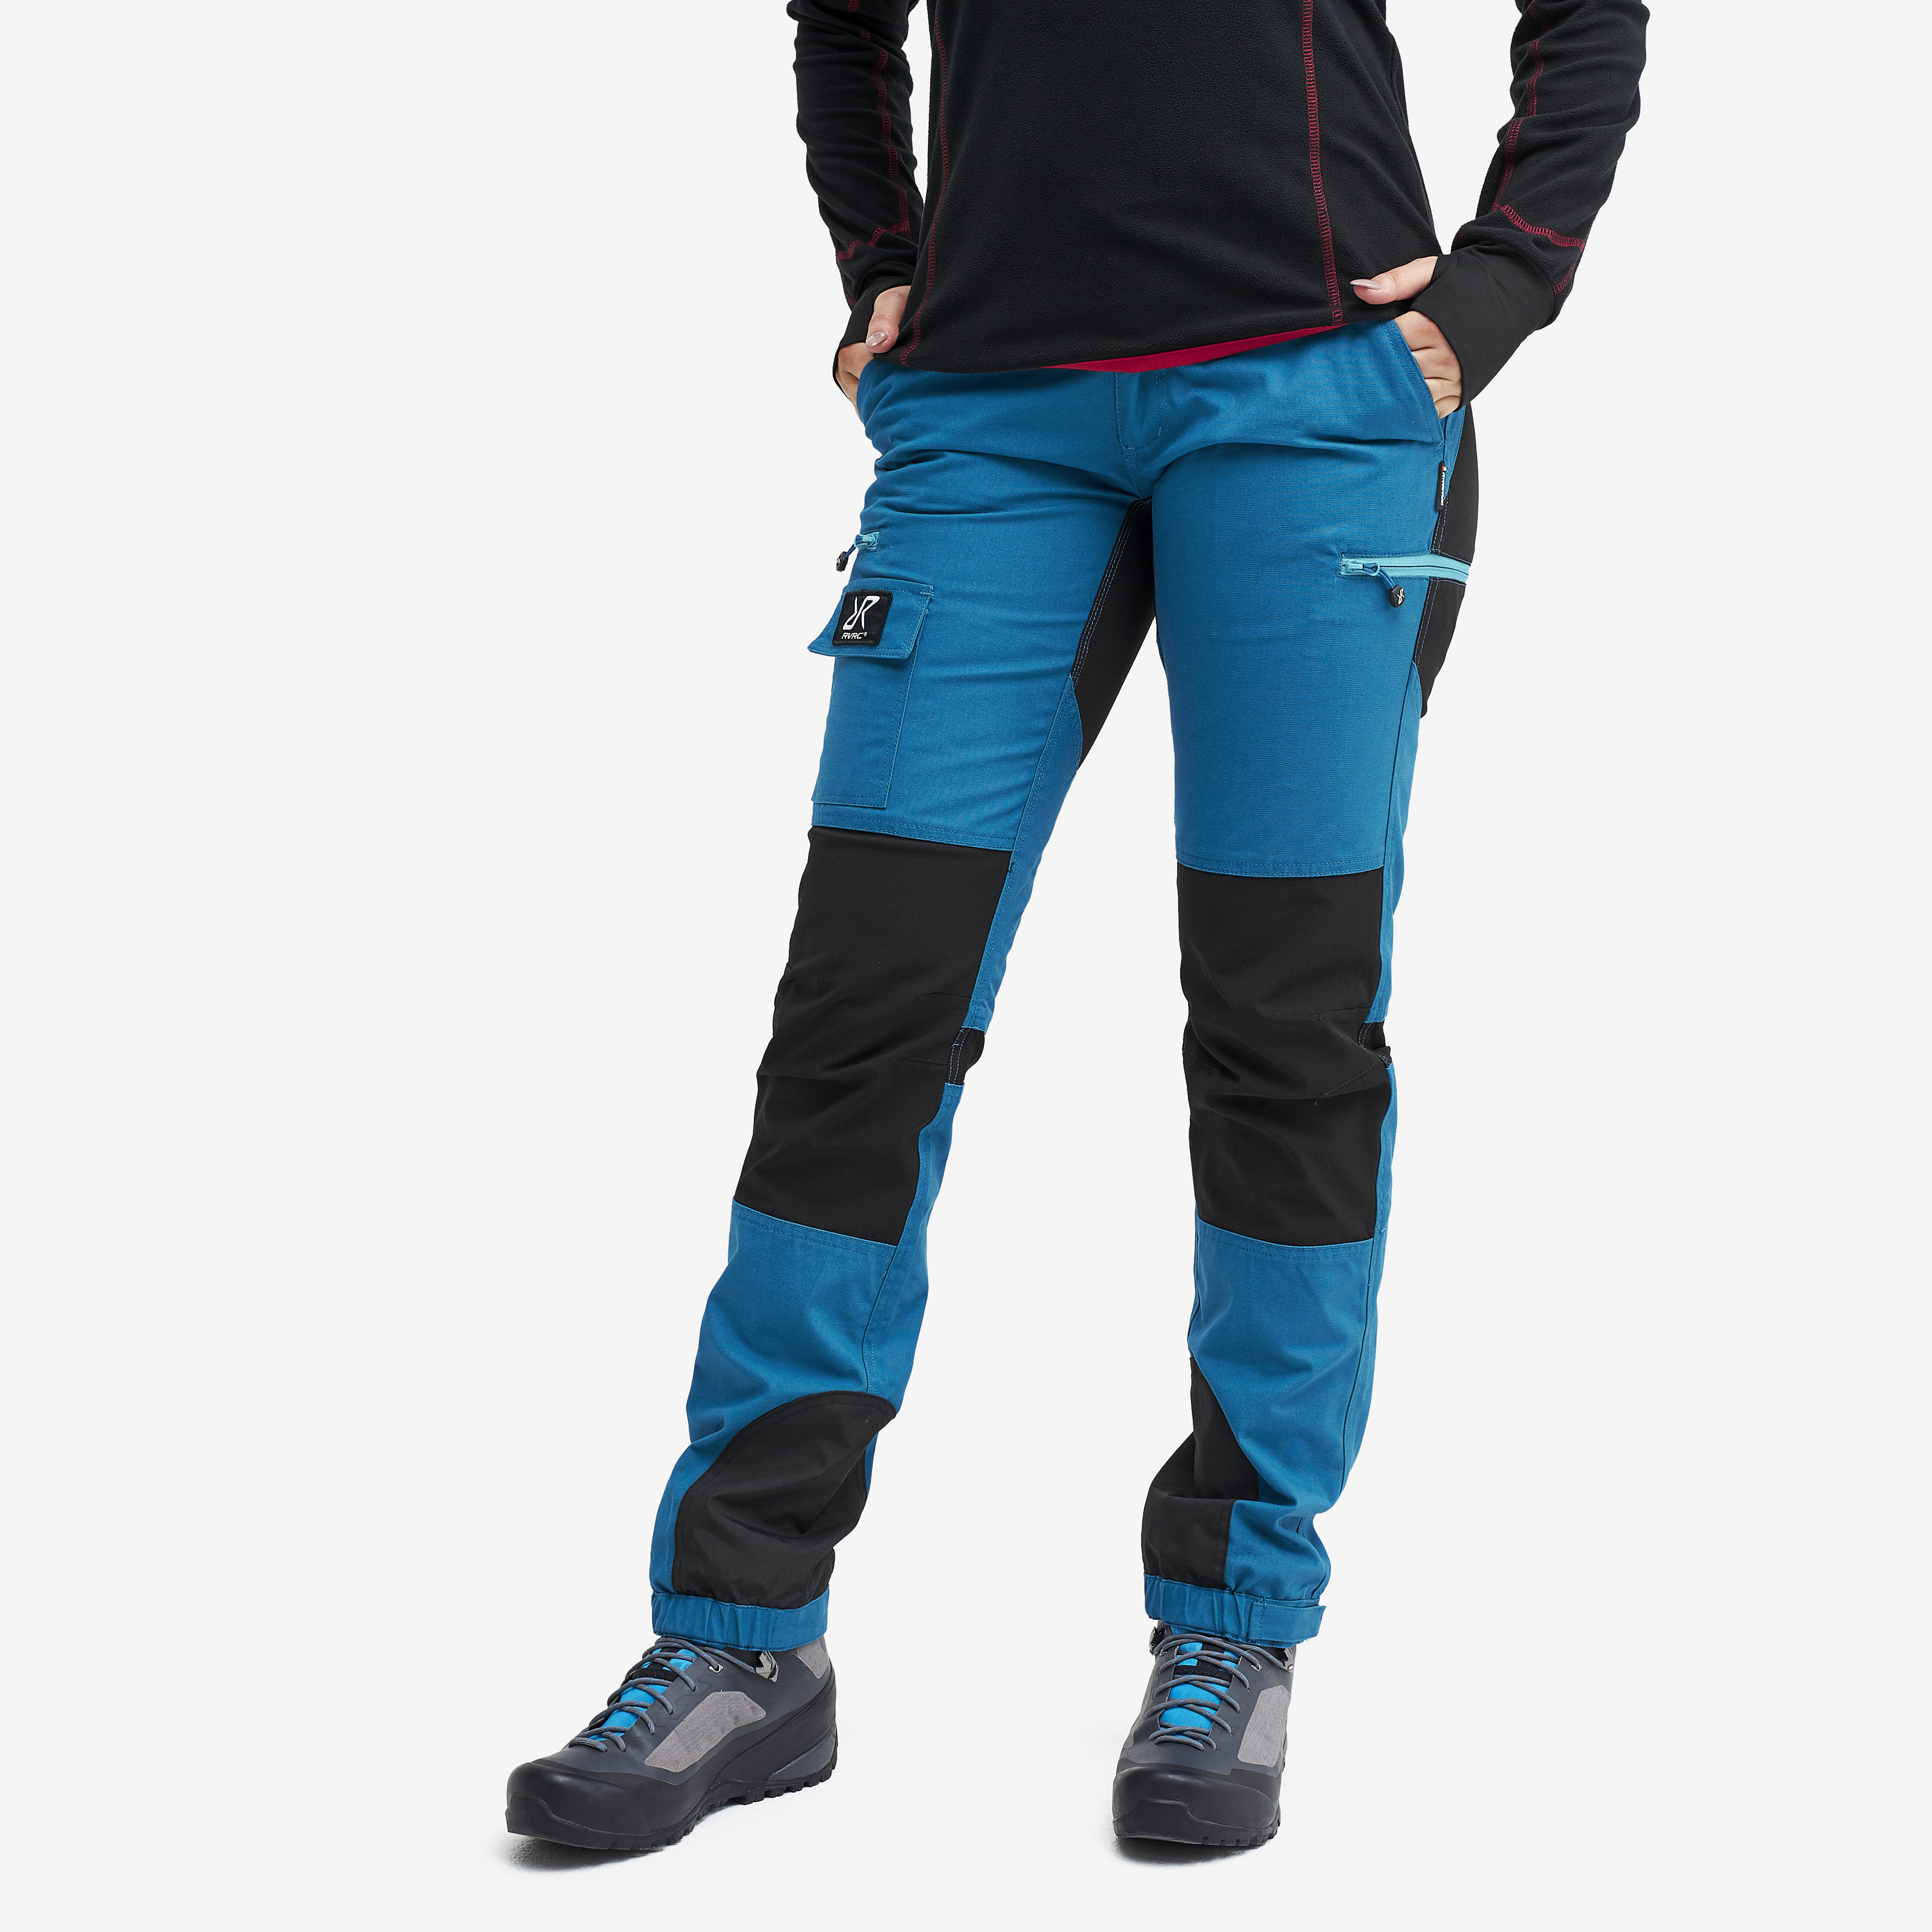 Nordwand outdoor pants for women in blue